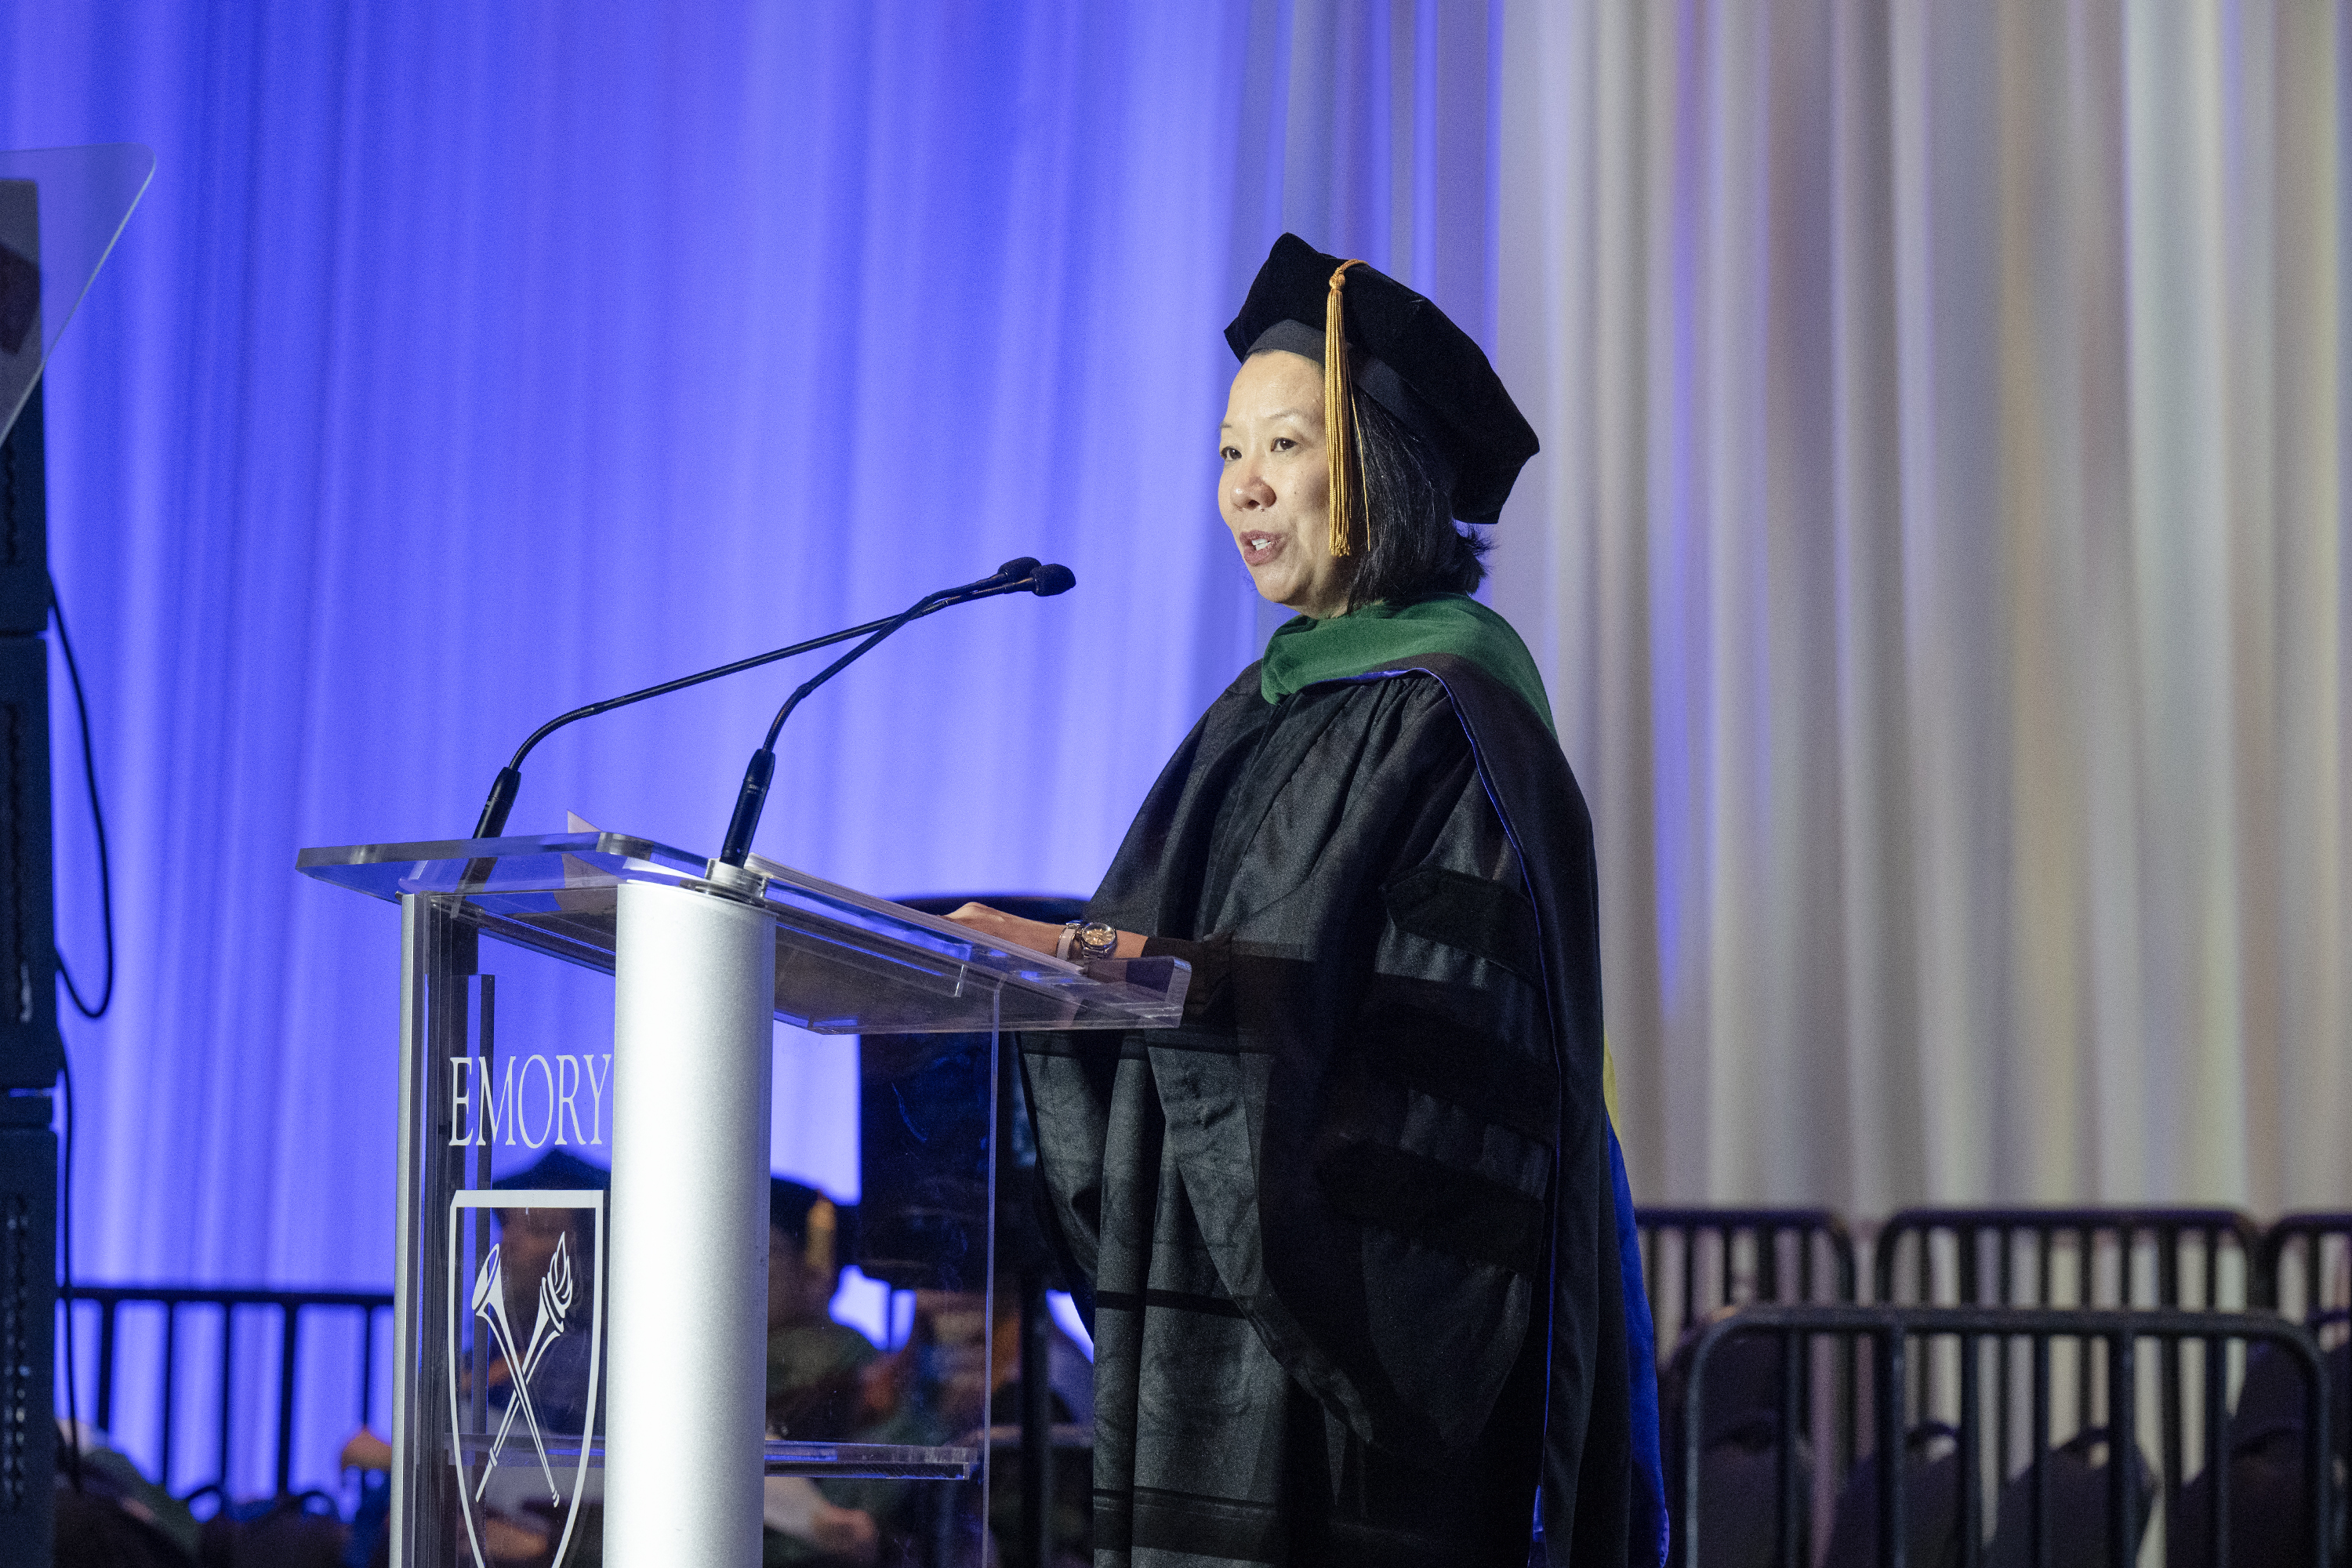 Woman in cap and gown at glass podium